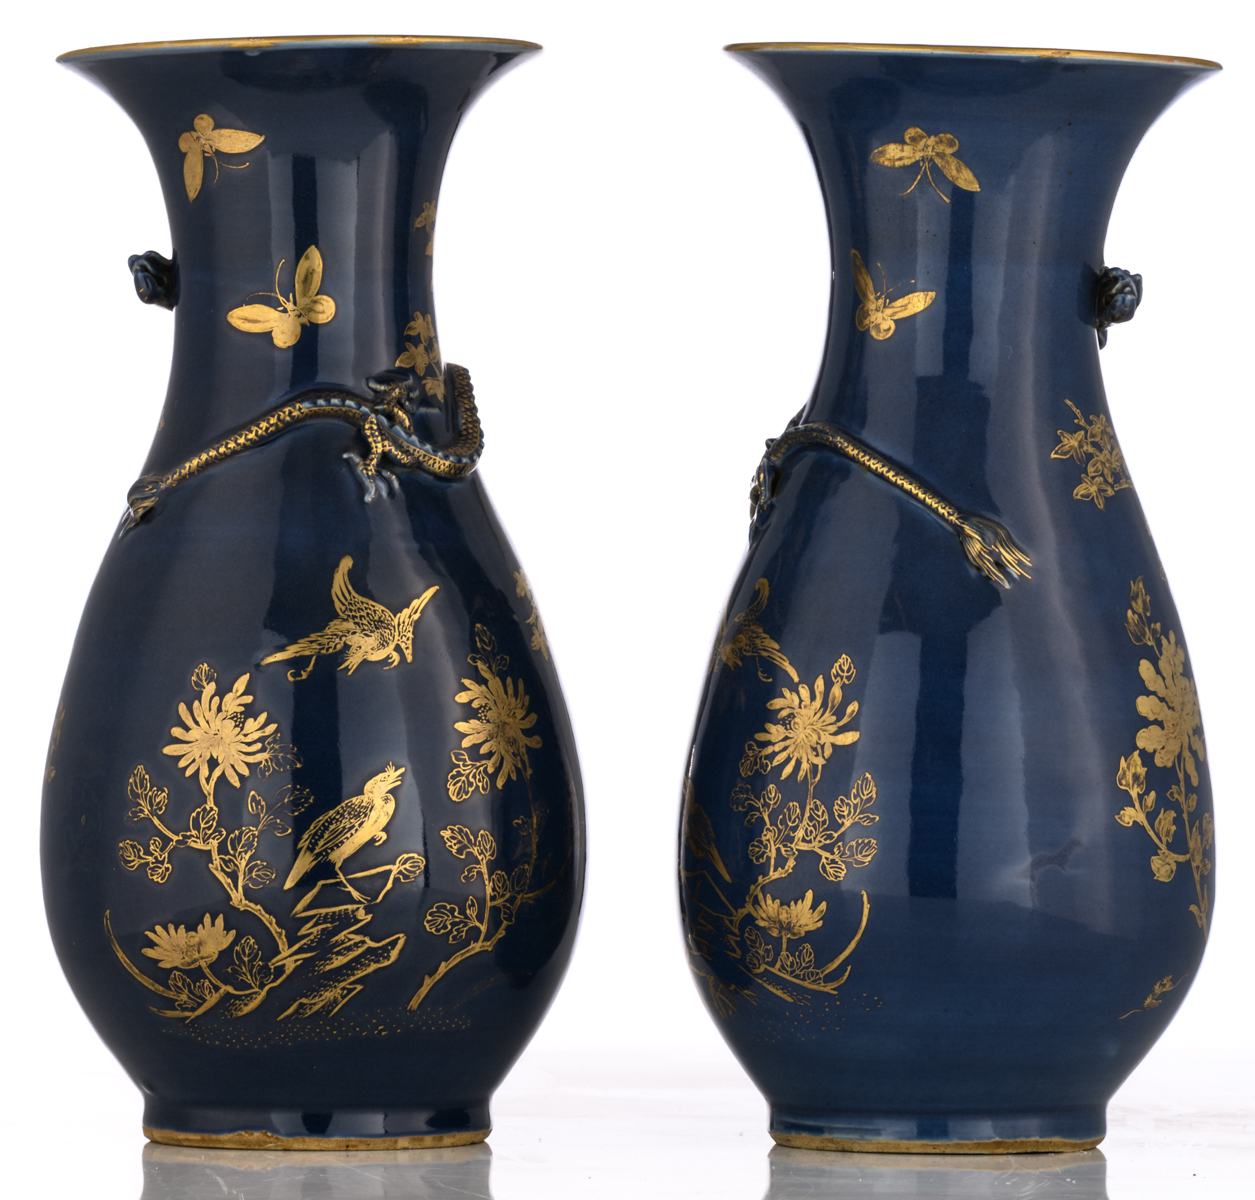 A pair of Chinese 'bleu soufflé' pear shaped vases, gilt and relief decorated with dragons and - Image 4 of 6